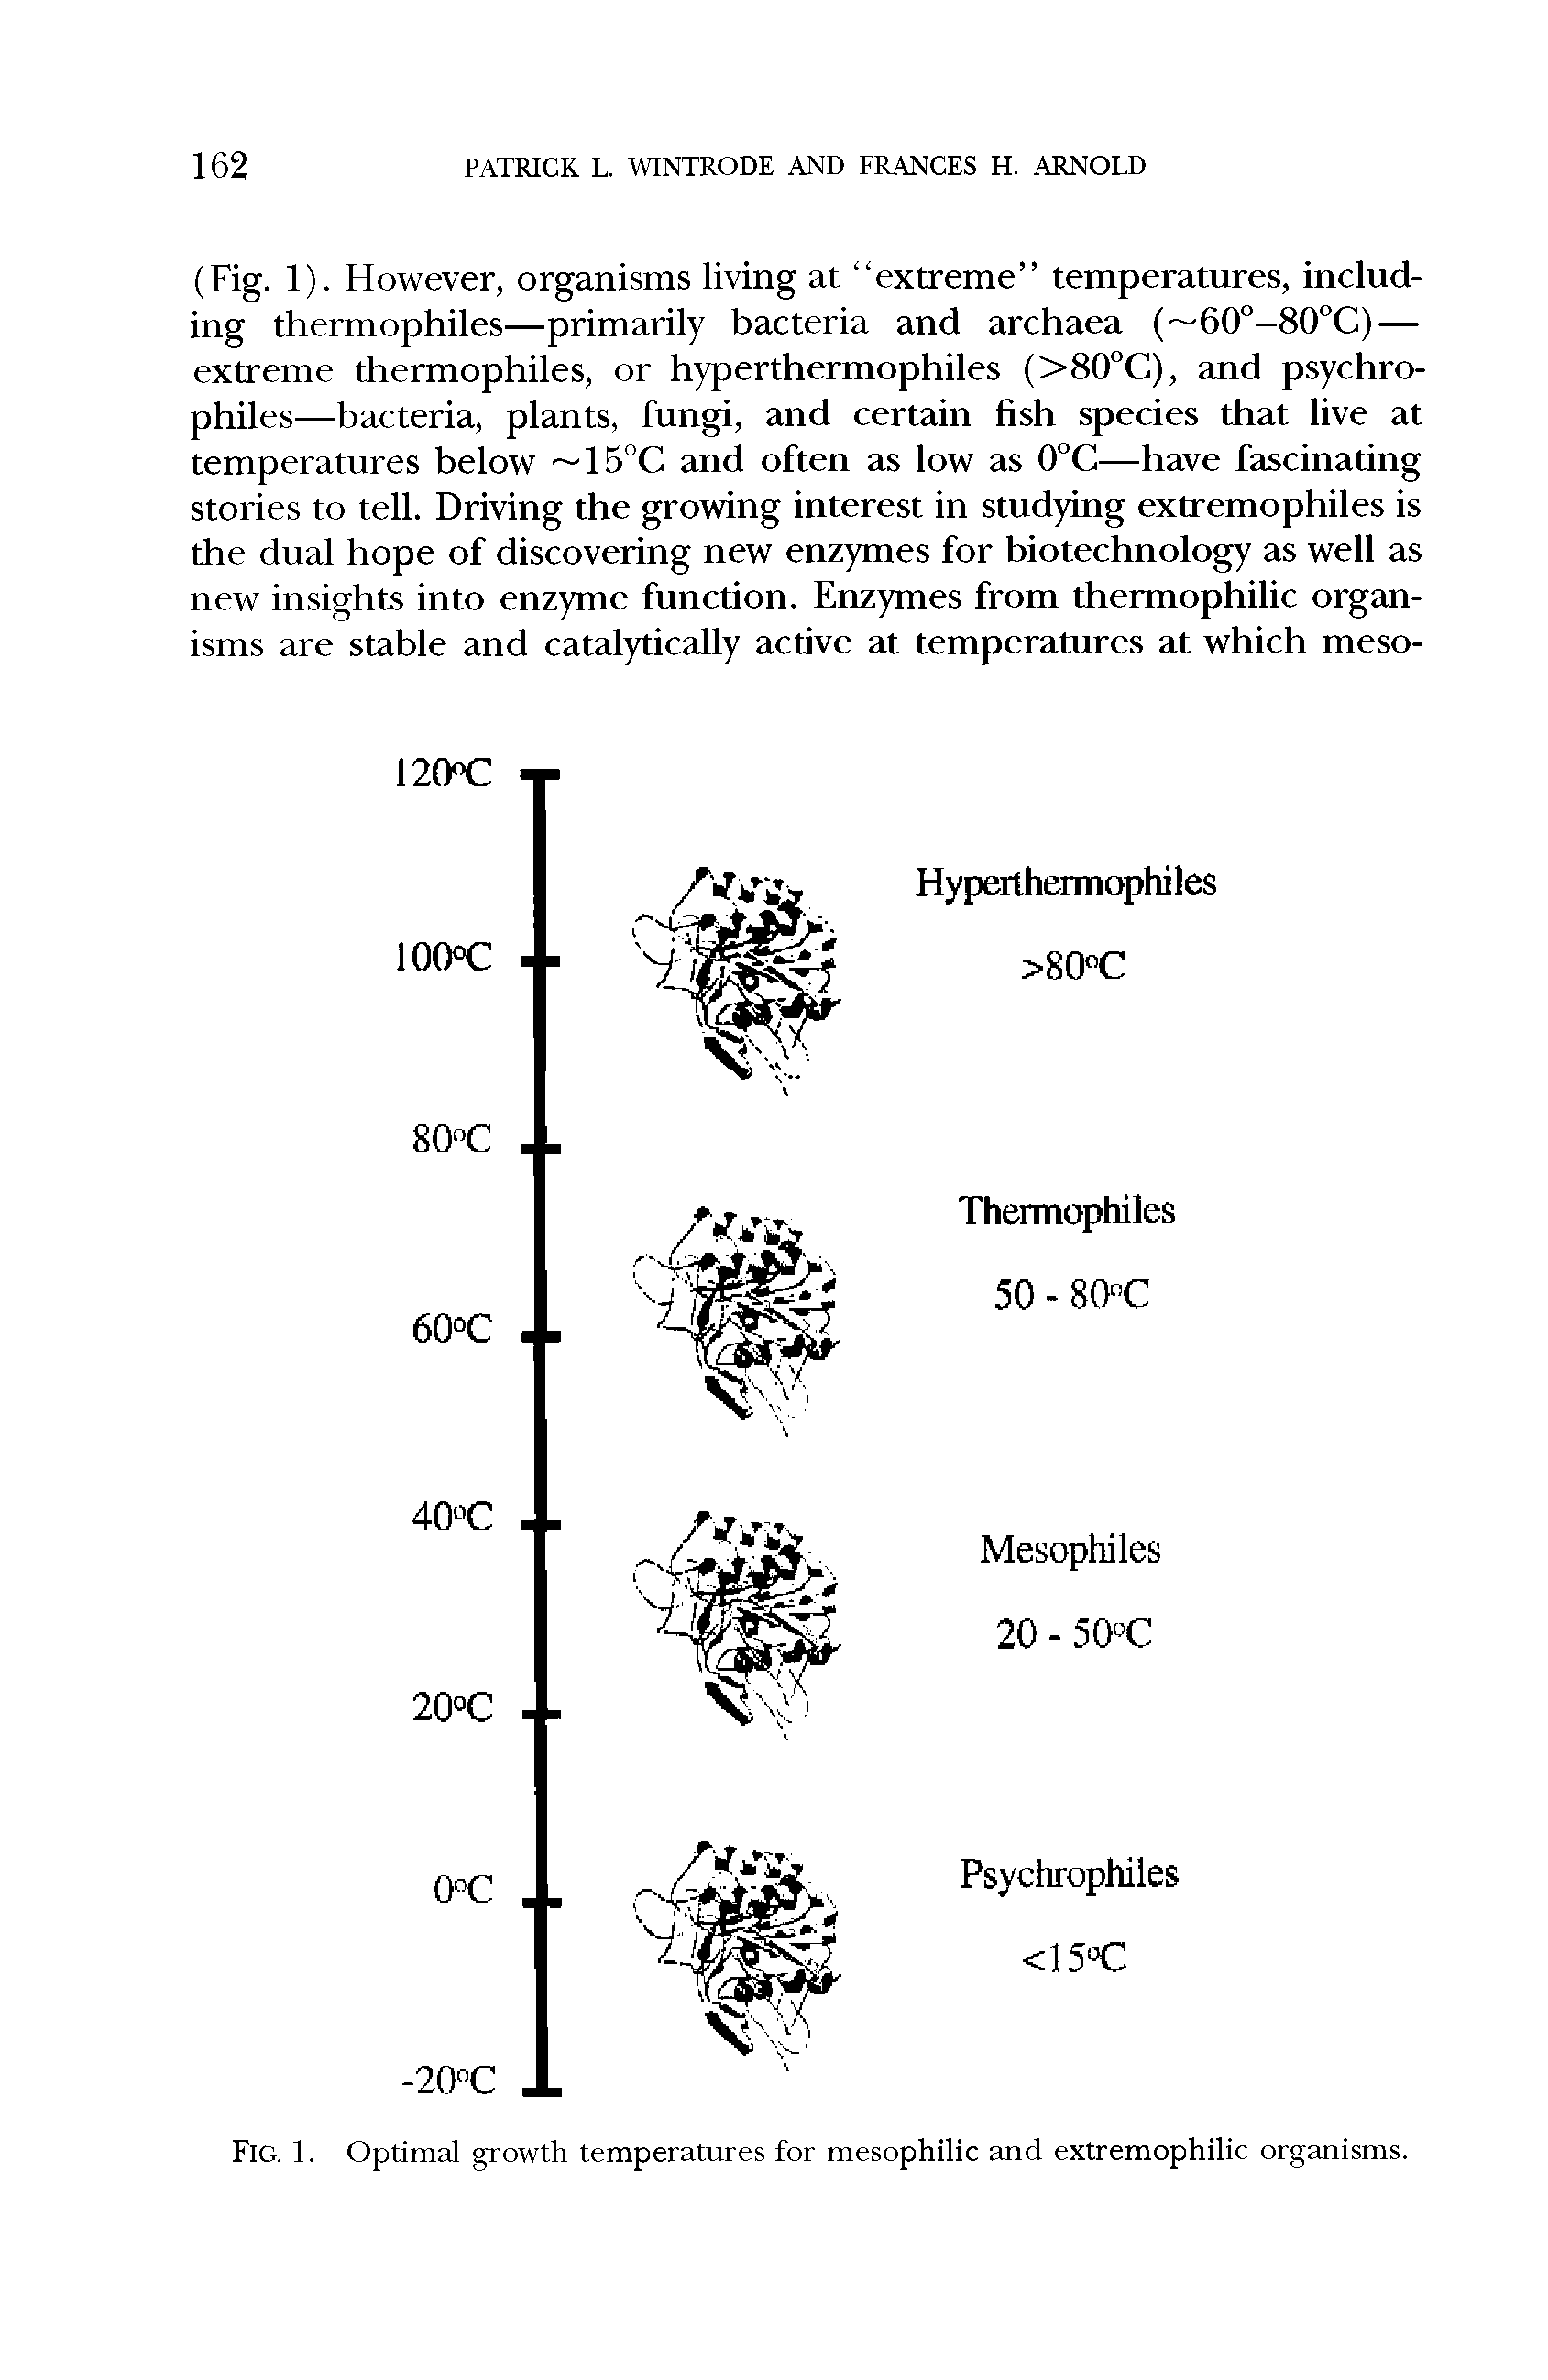 Fig. 1. Optimal growth temperatures for mesophilic and extremophilic organisms.